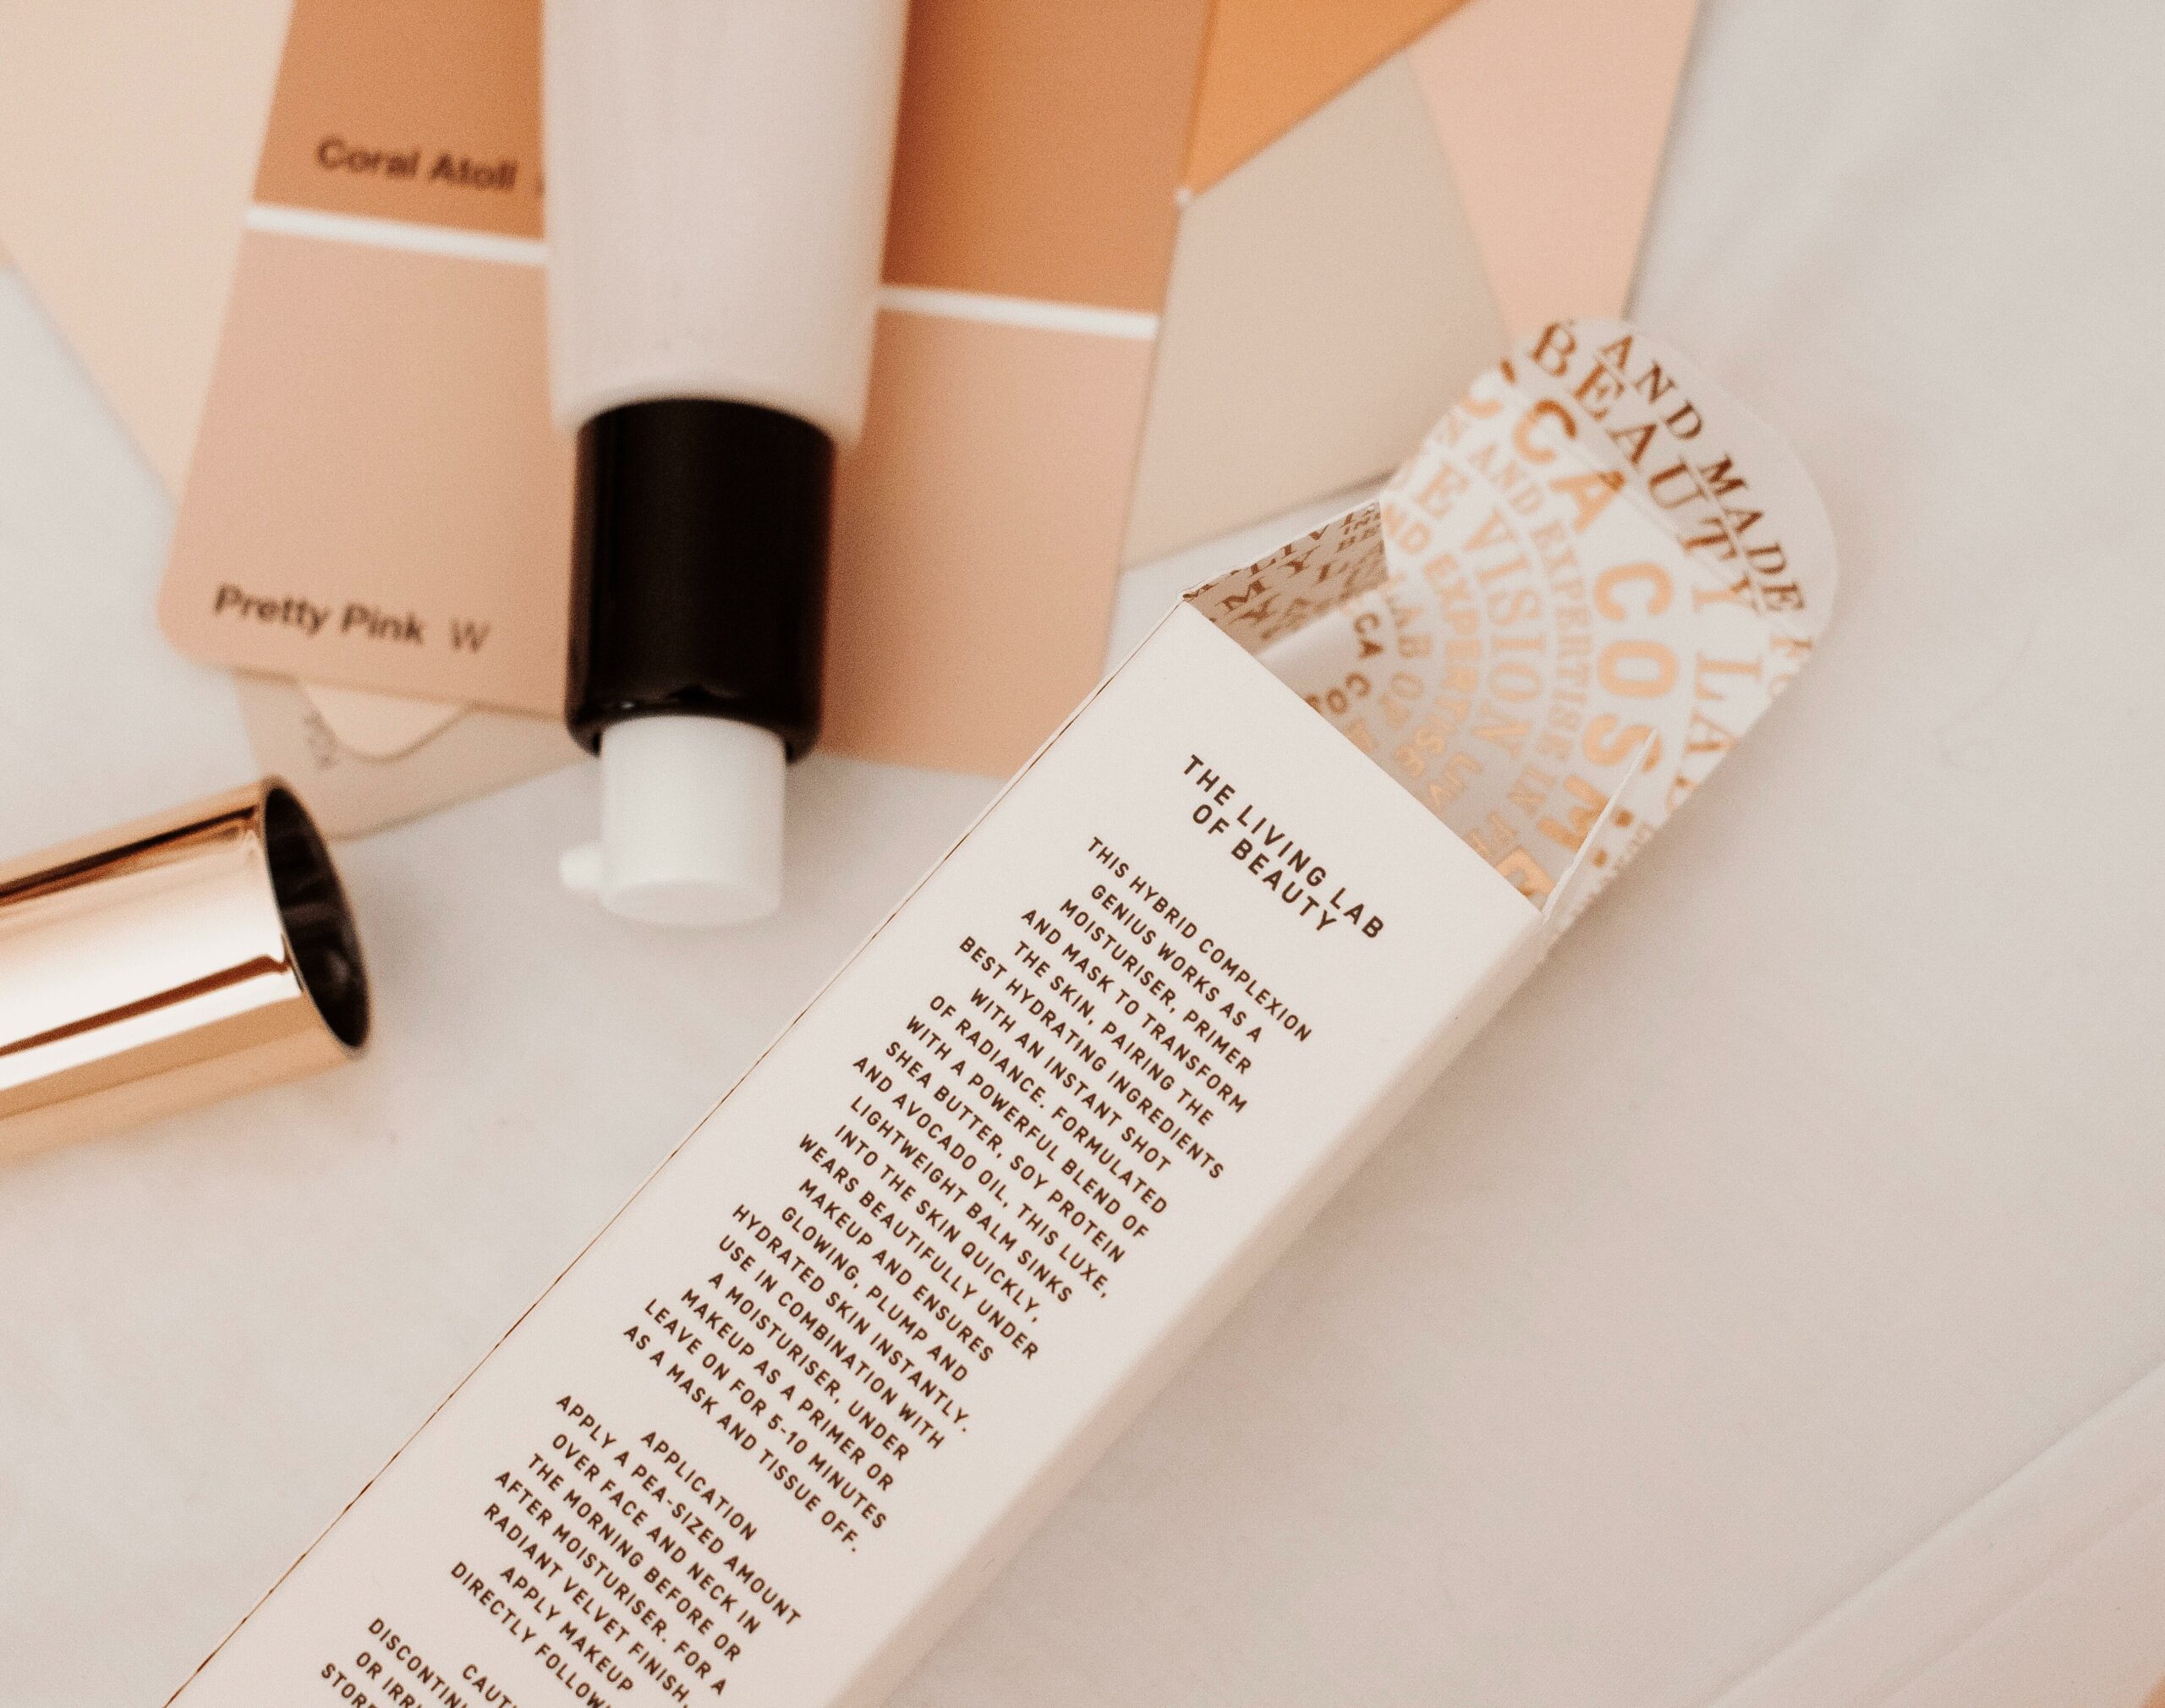 Beauty brands: how to choose which social media to use?